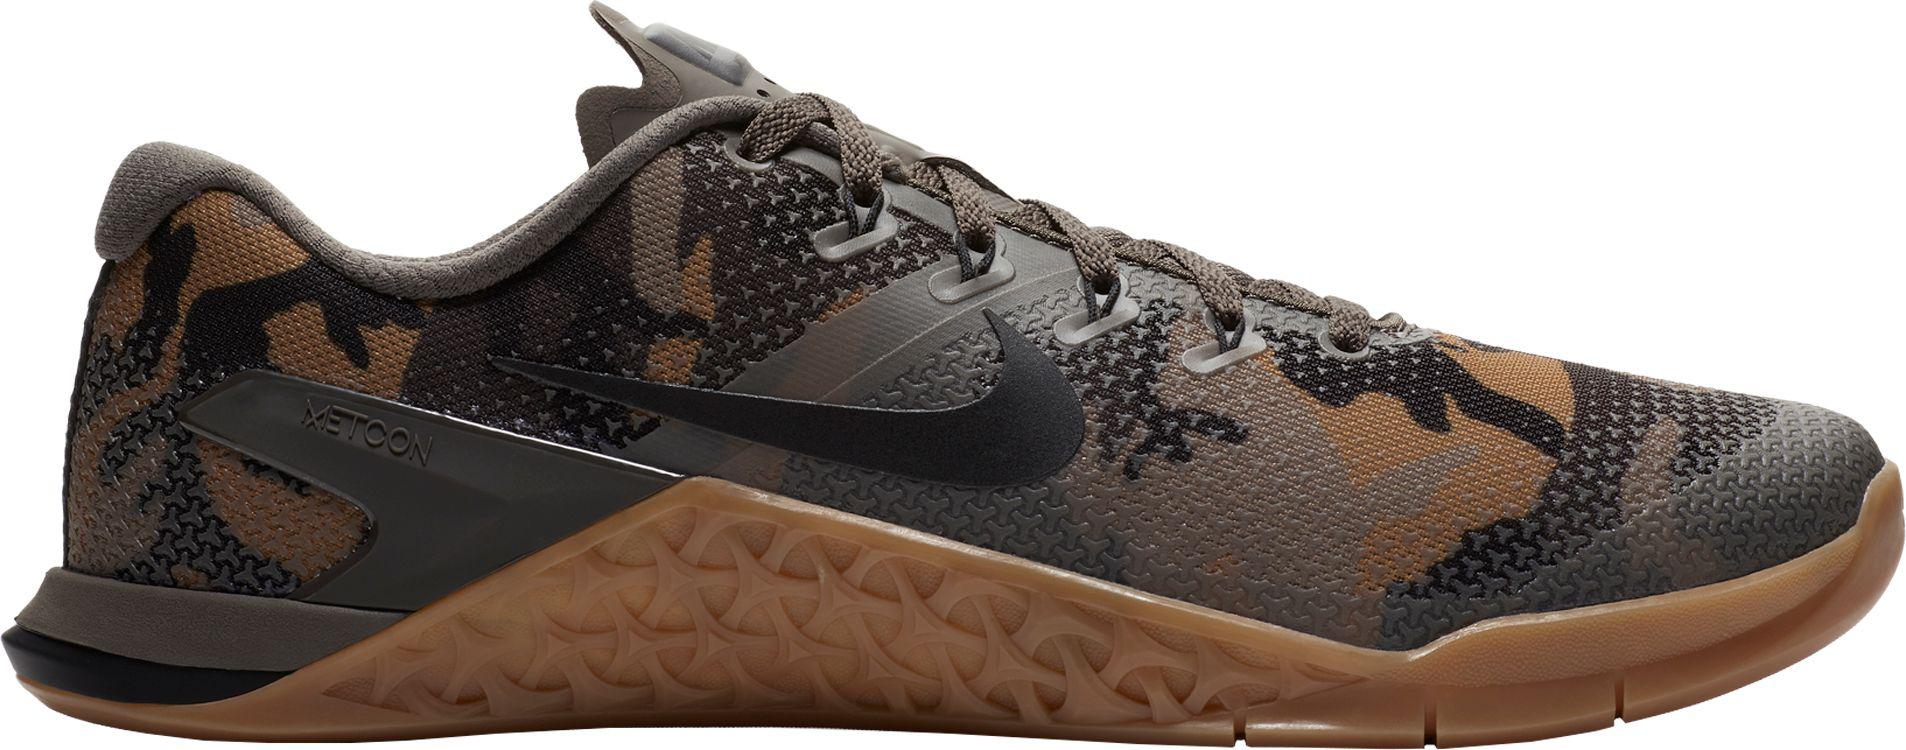 Lyst Nike Metcon 4 Camo Training Shoes in Brown for Men